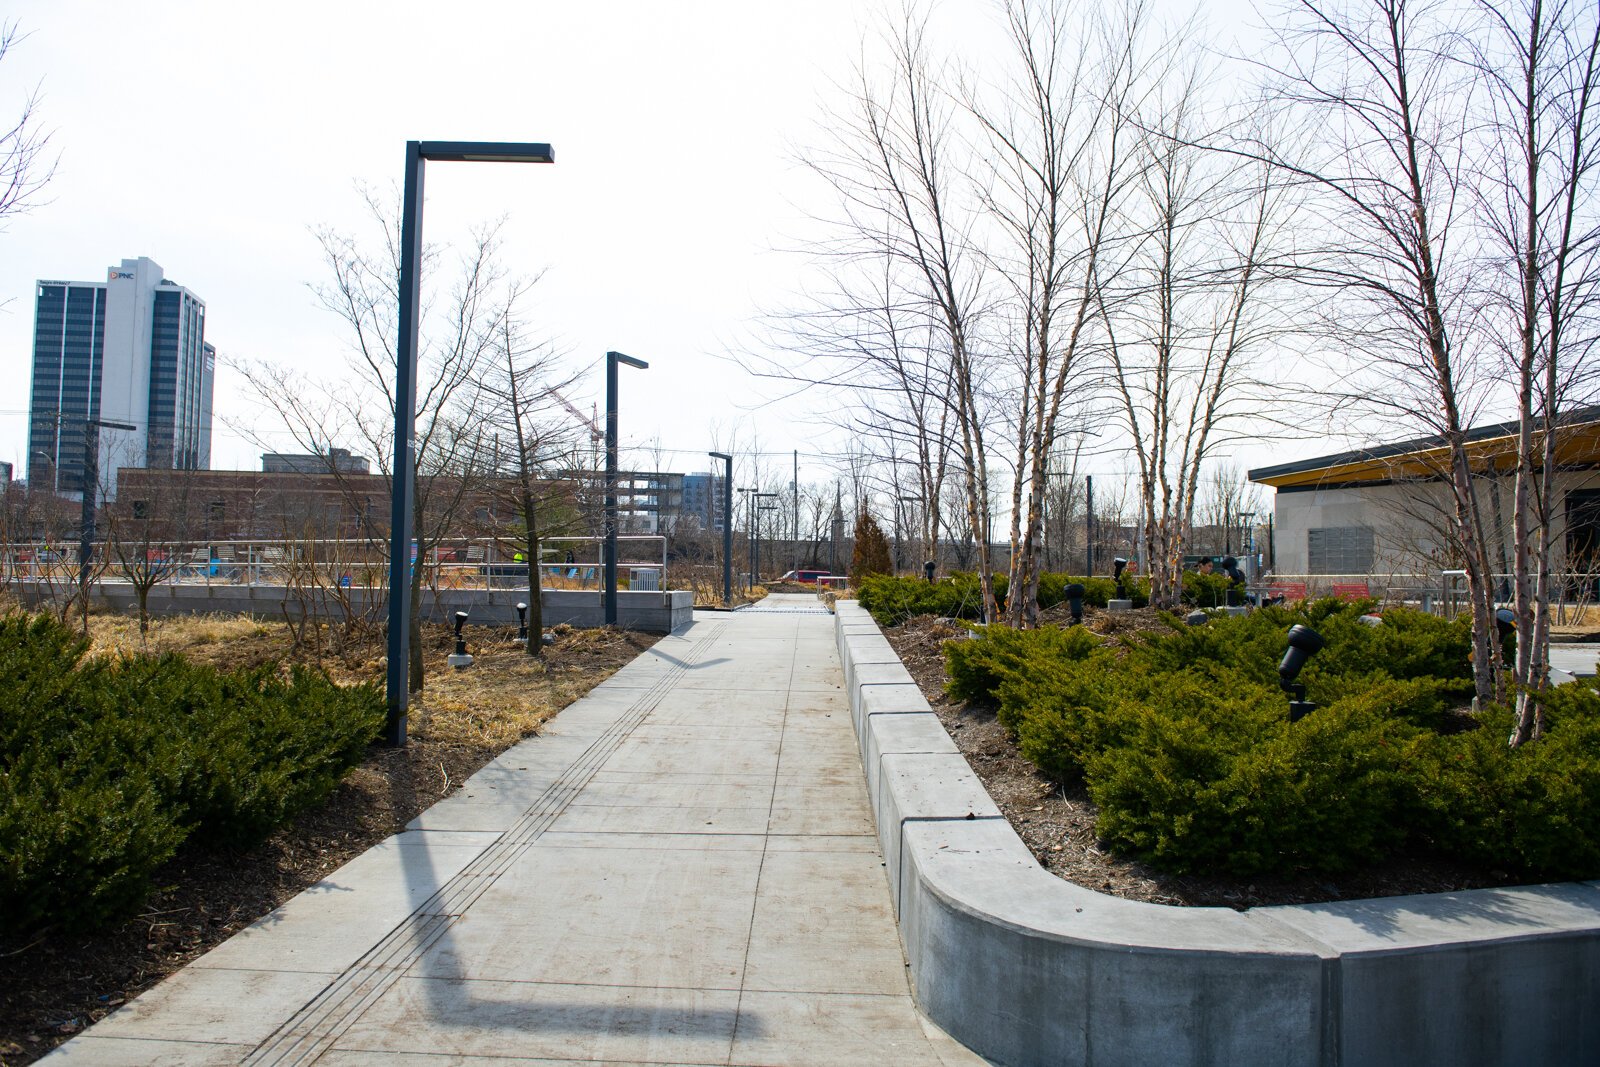 Parks and green infrastructure function as "backyards" for city-dwellers Downtown.